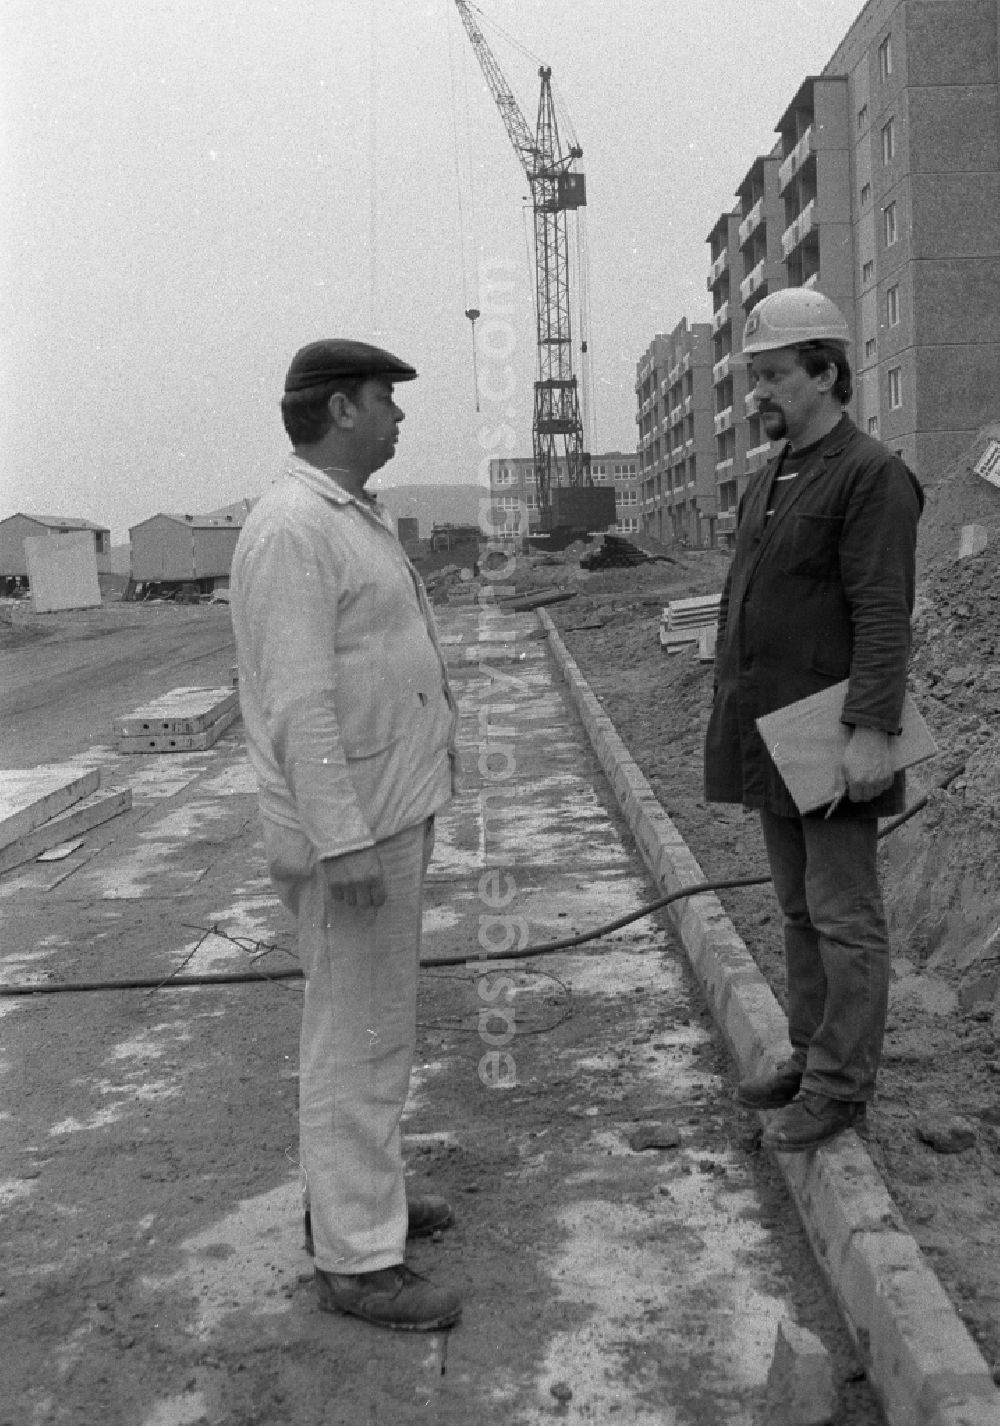 GDR picture archive: Berlin - Construction site for the new construction of apartments by the youth brigade Timm on the street Teterower Ring in the district of Marzahn in Berlin East Berlin on the territory of the former GDR, German Democratic Republic